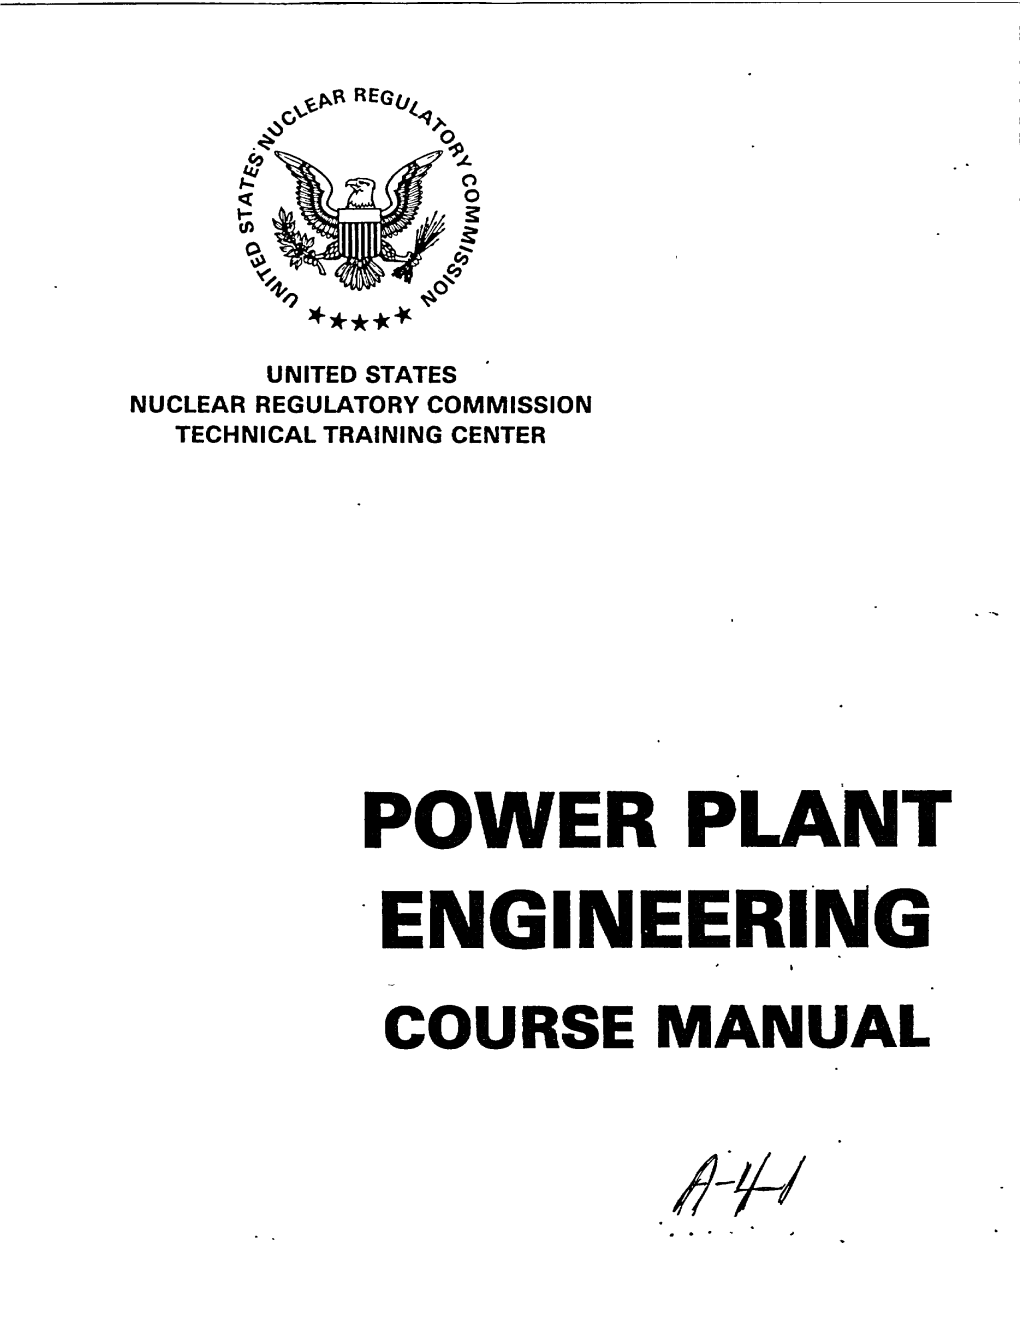 USNRC Technical Training Center, Power Plant Engineering Course